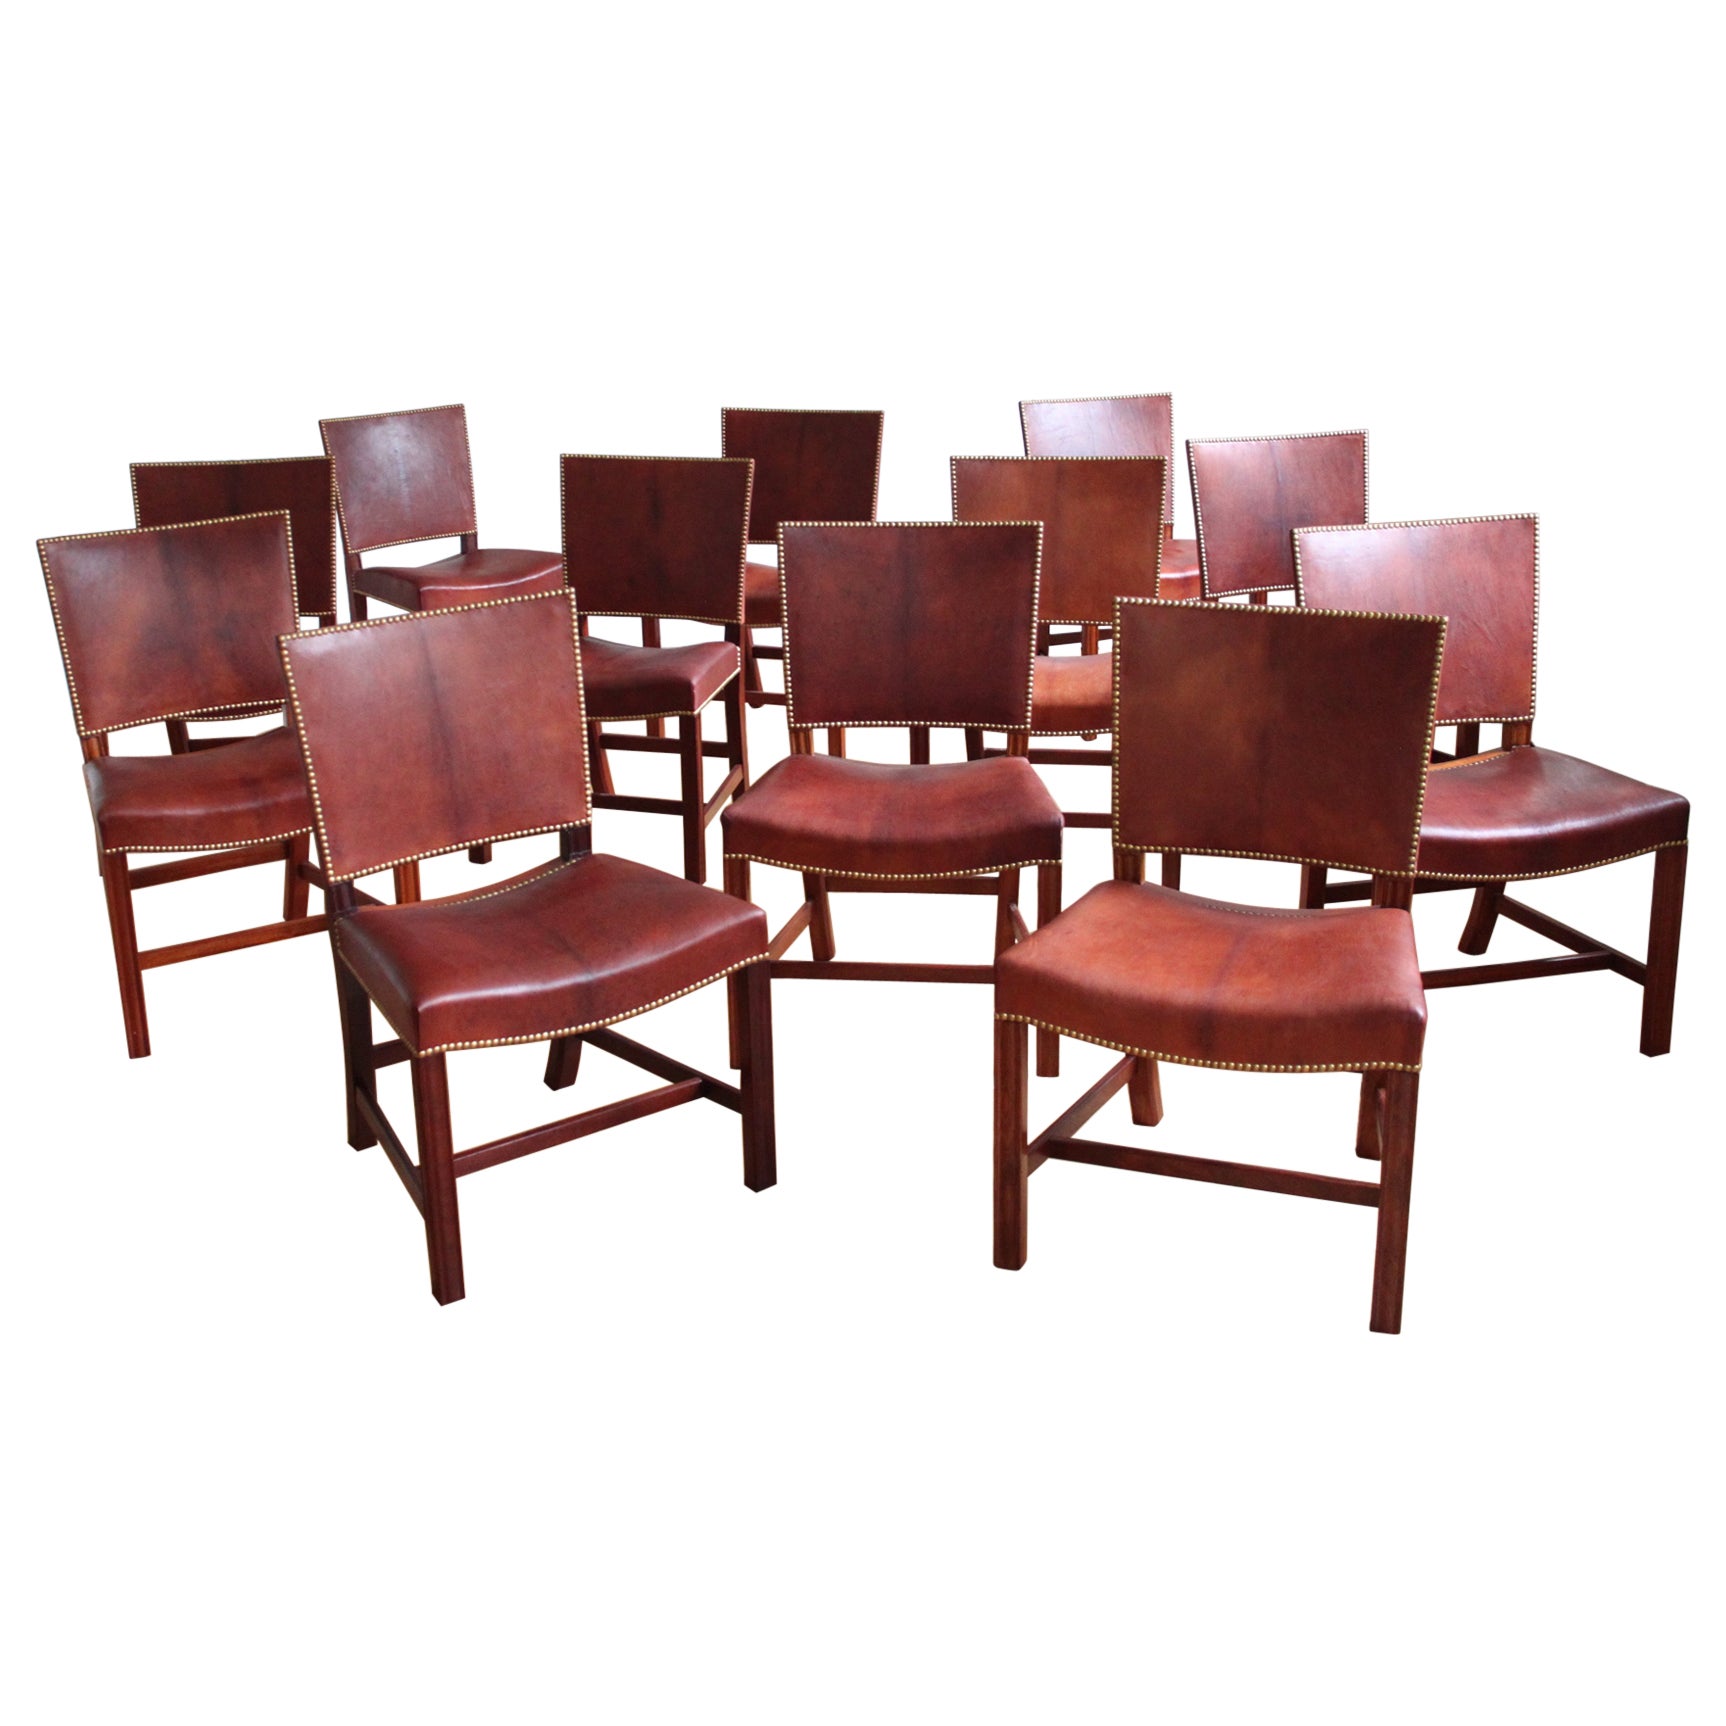 Set of Twelve Kaare Klint Red Chairs, Rud Rasmussen, Niger Leather and Mahogany For Sale